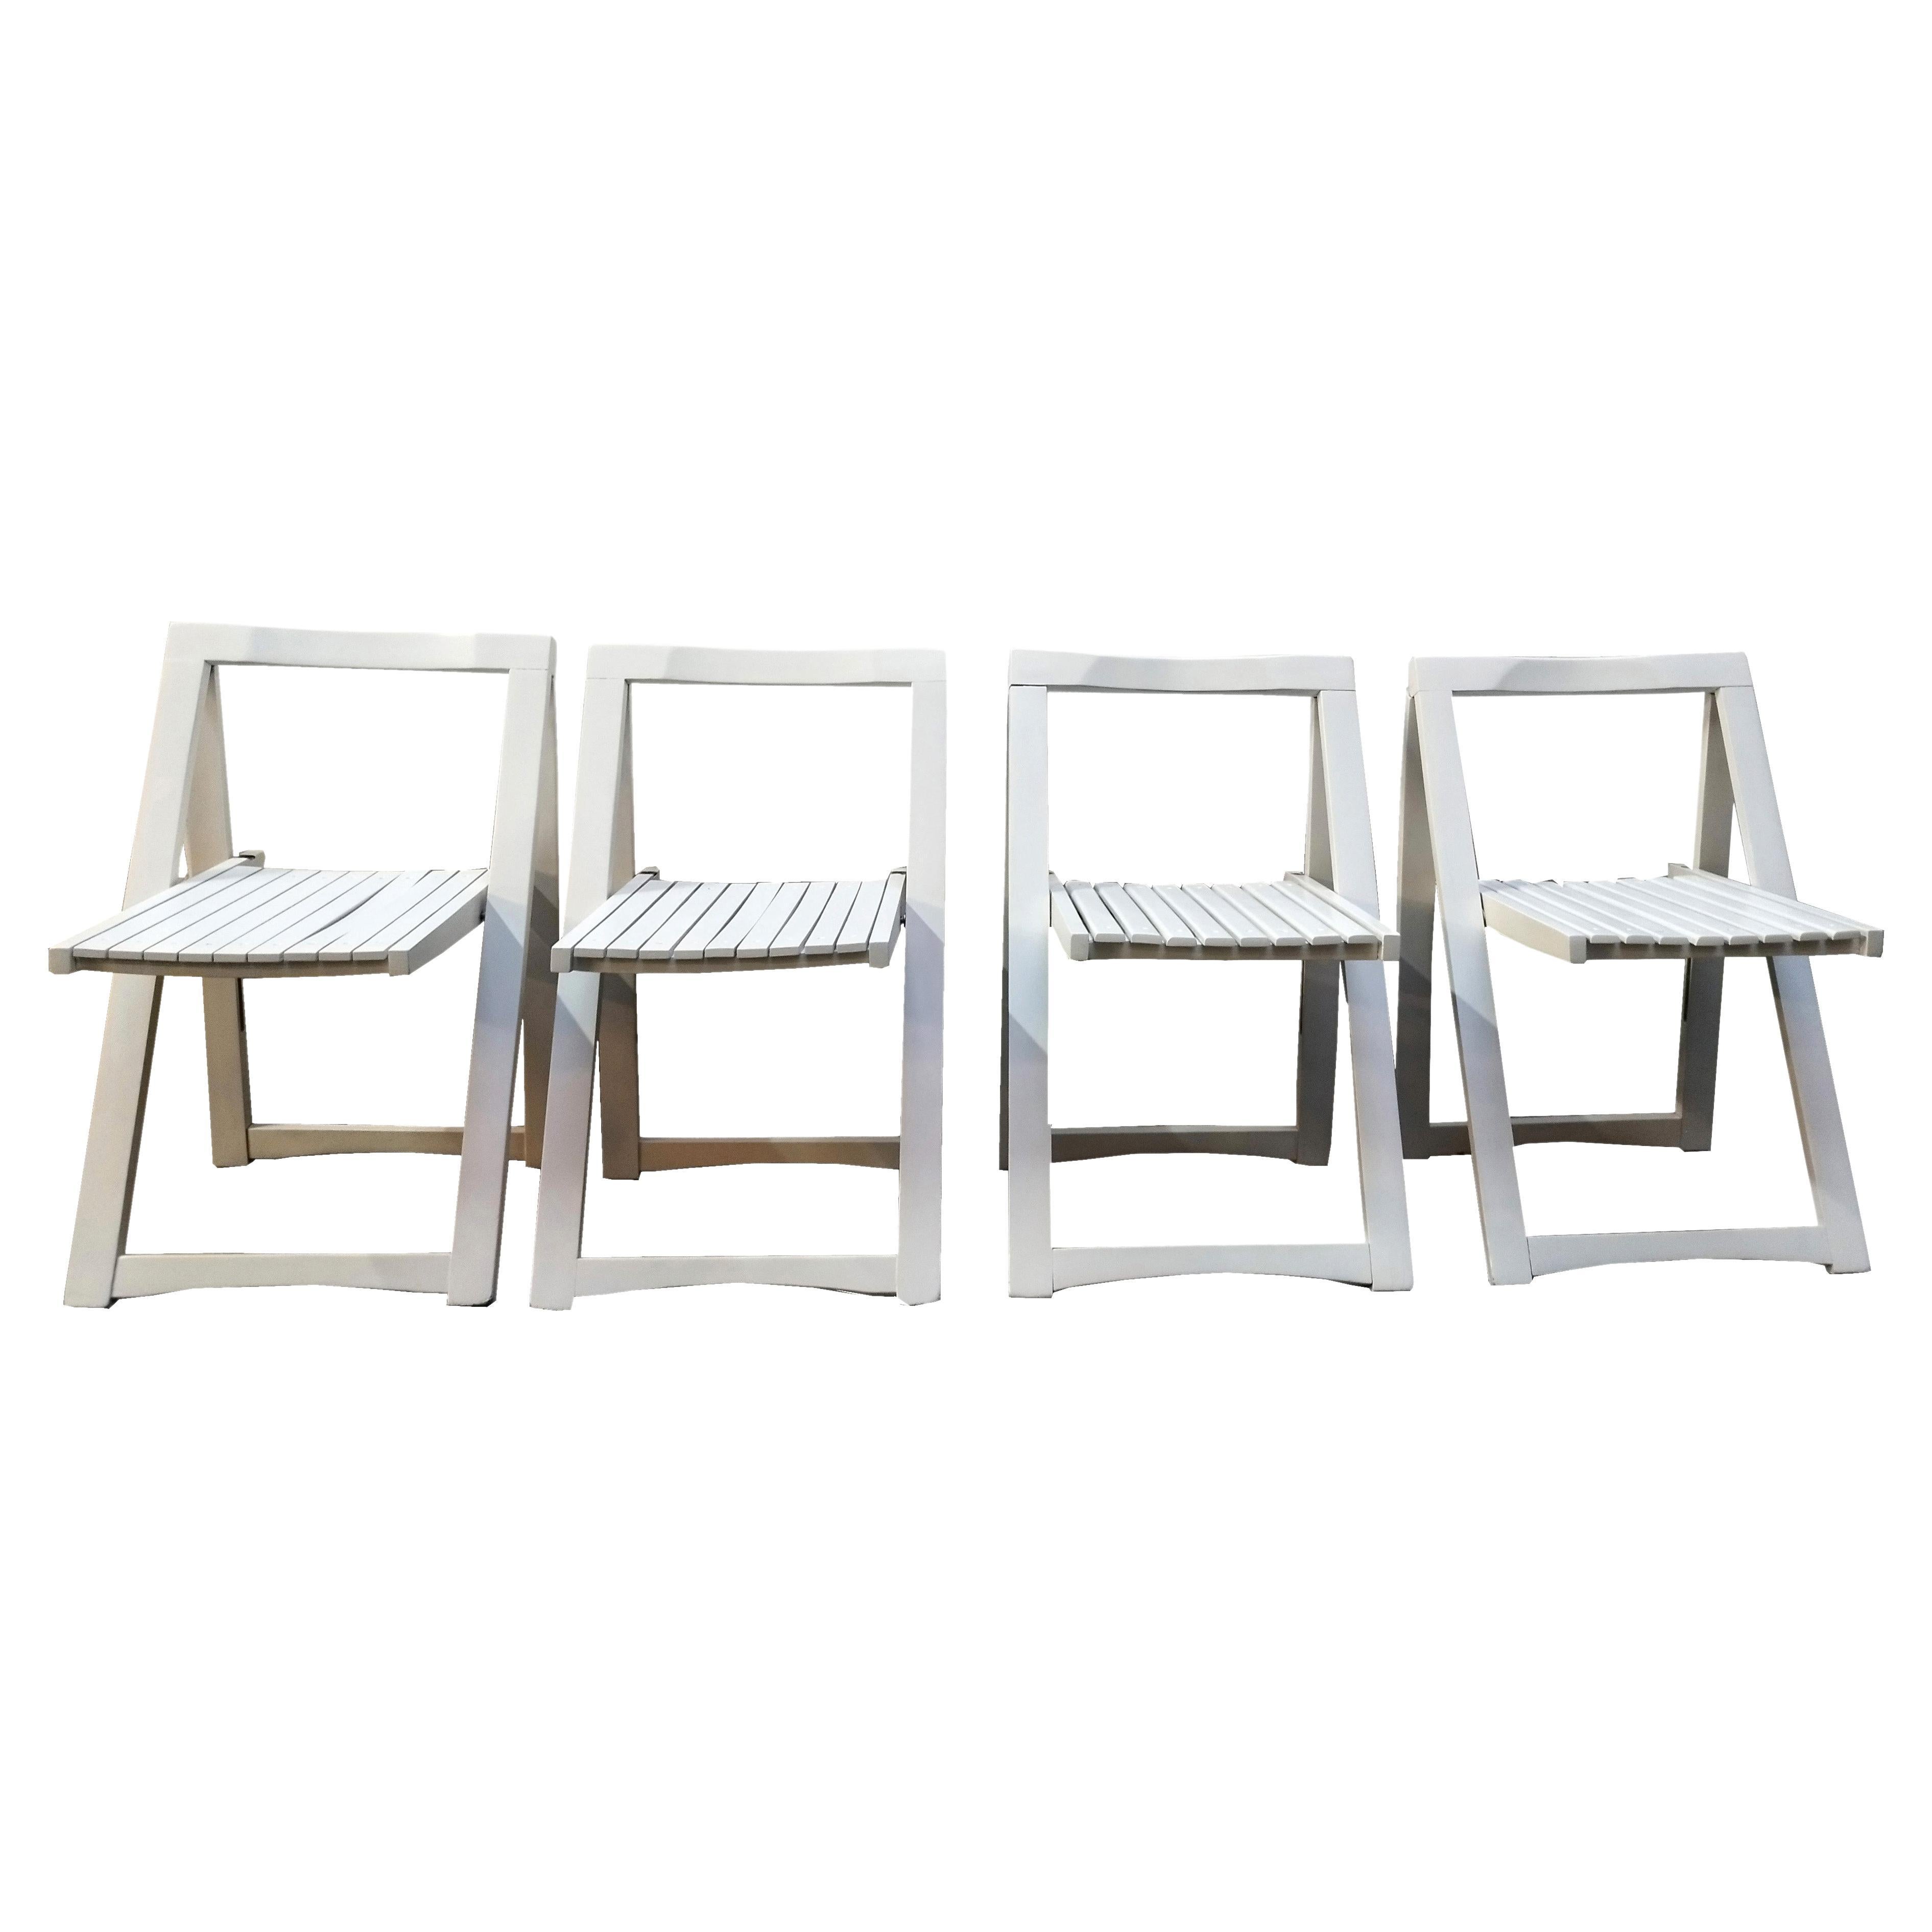 Aldo Jacober for Bazzani Group of 4 White "Trieste" Folding Chairs, Italy 1970s For Sale